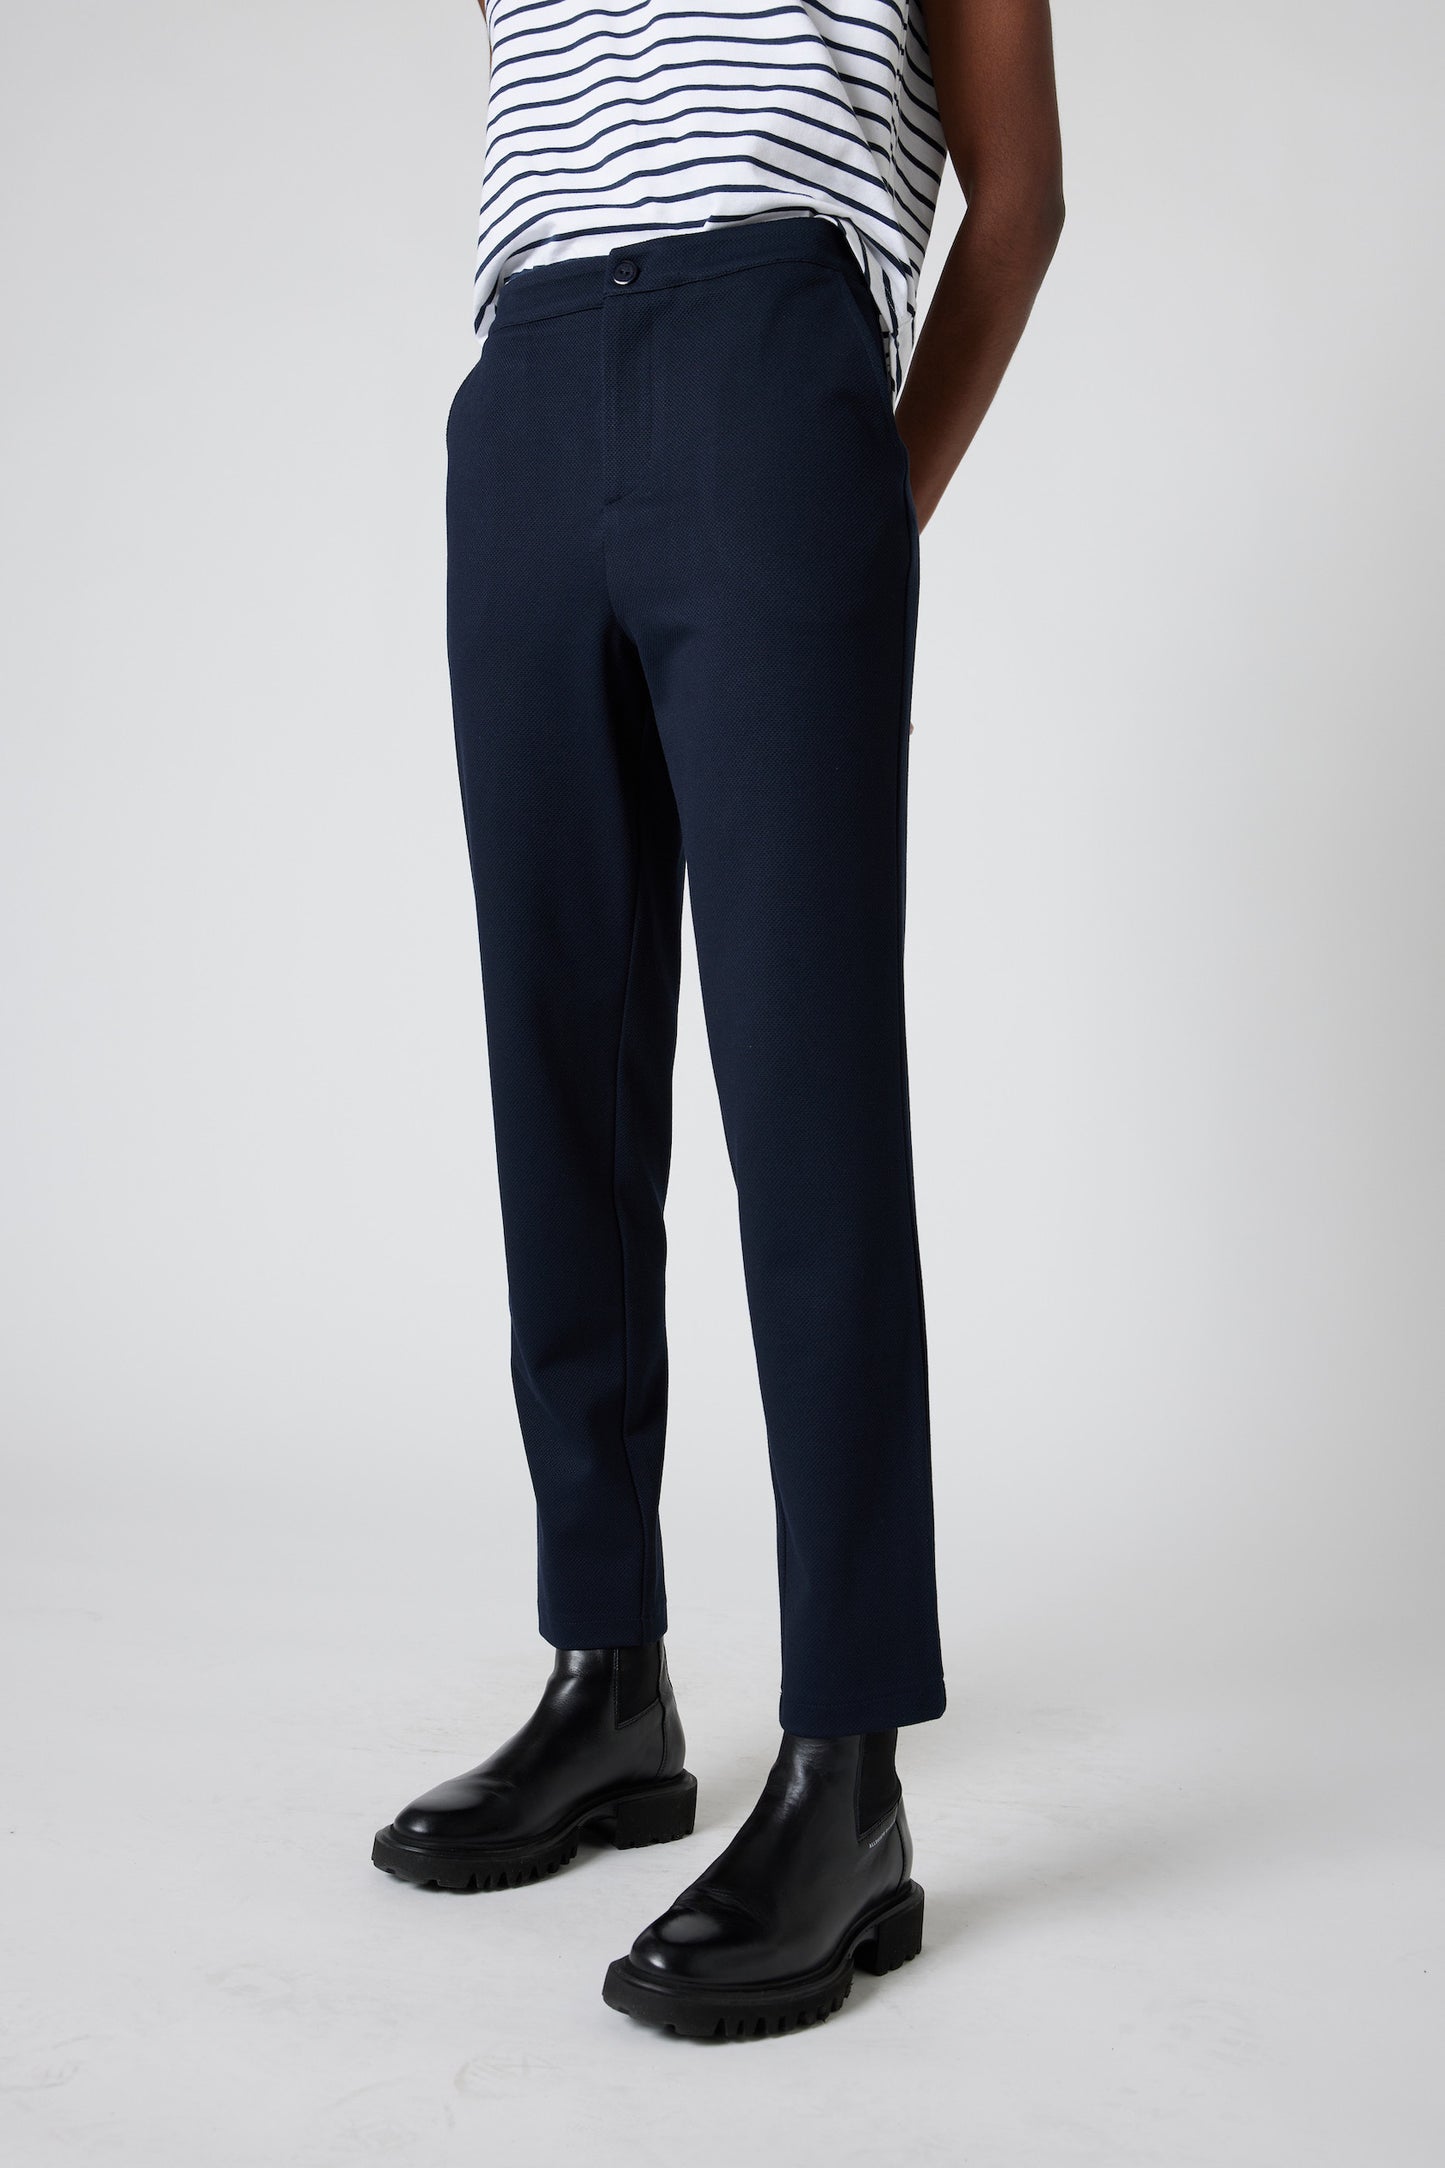 The Textured Comfort Trouser